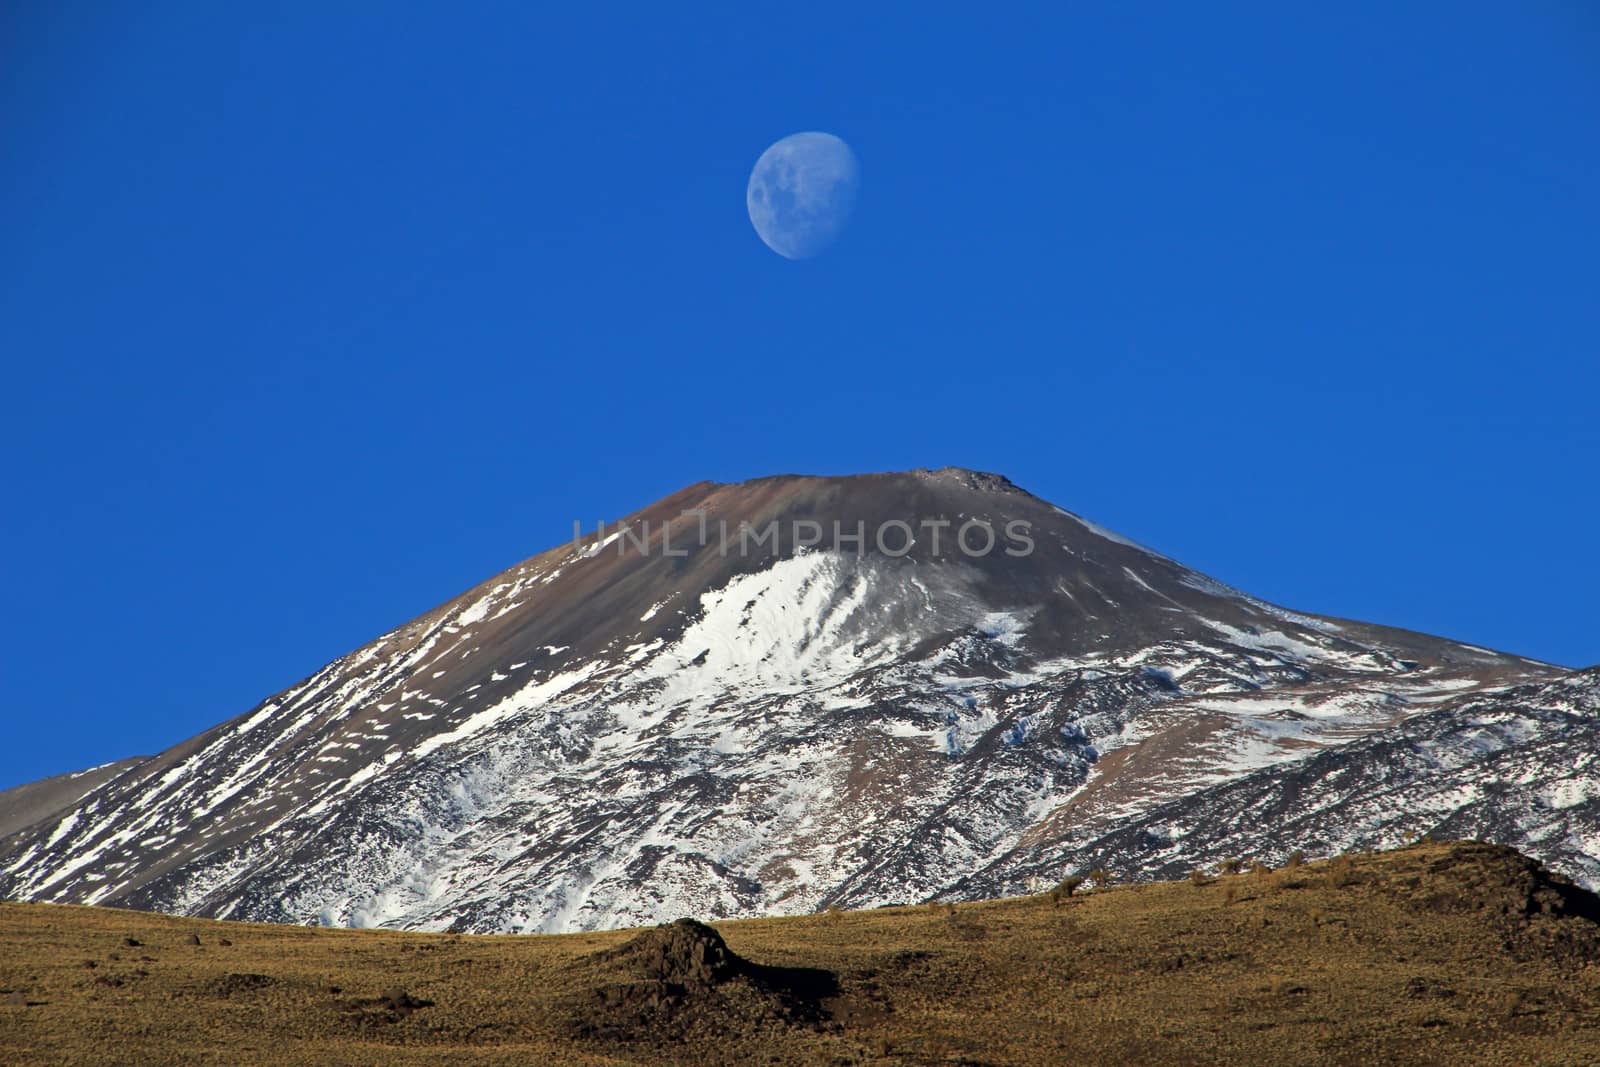 Snowcovered Volcano Tromen with full moon, Argentina by cicloco